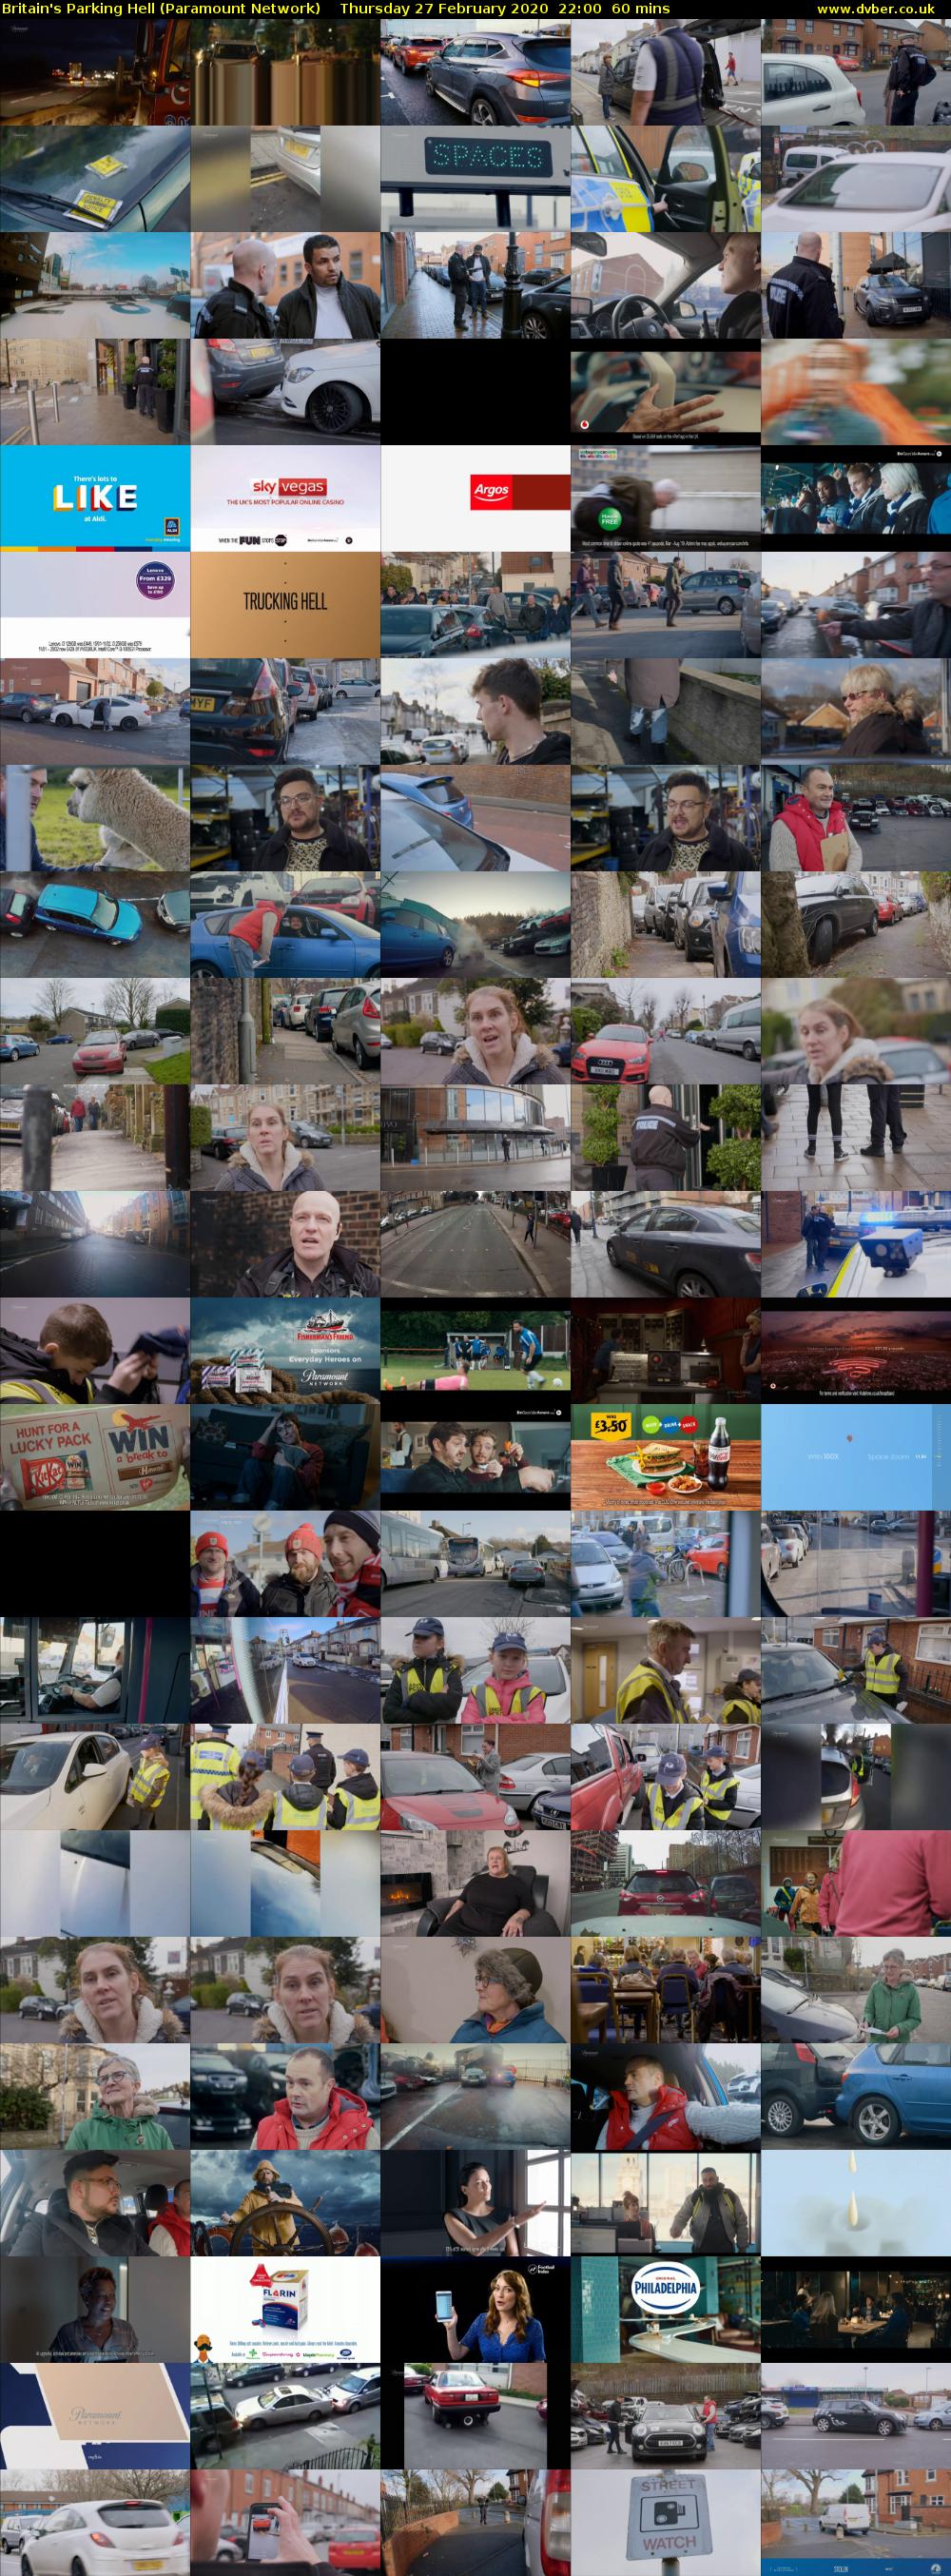 Britain's Parking Hell (Paramount Network) Thursday 27 February 2020 22:00 - 23:00